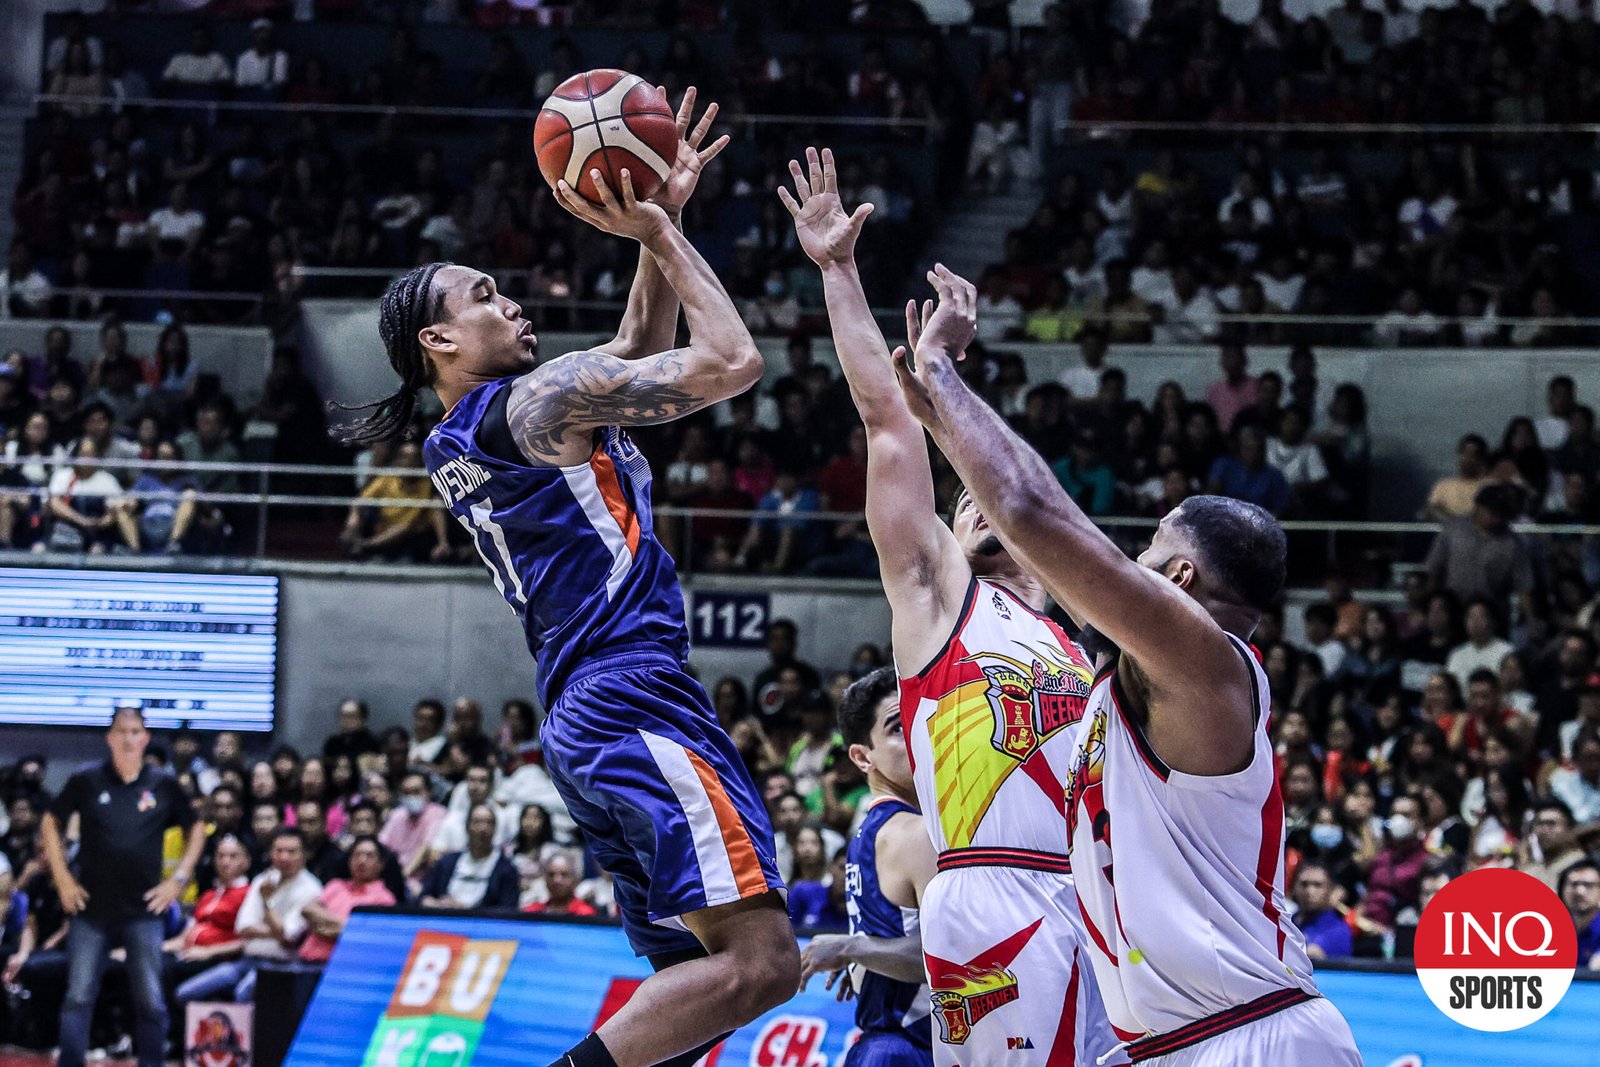 After very long wait, Bolts now belong in company of PBA immortals